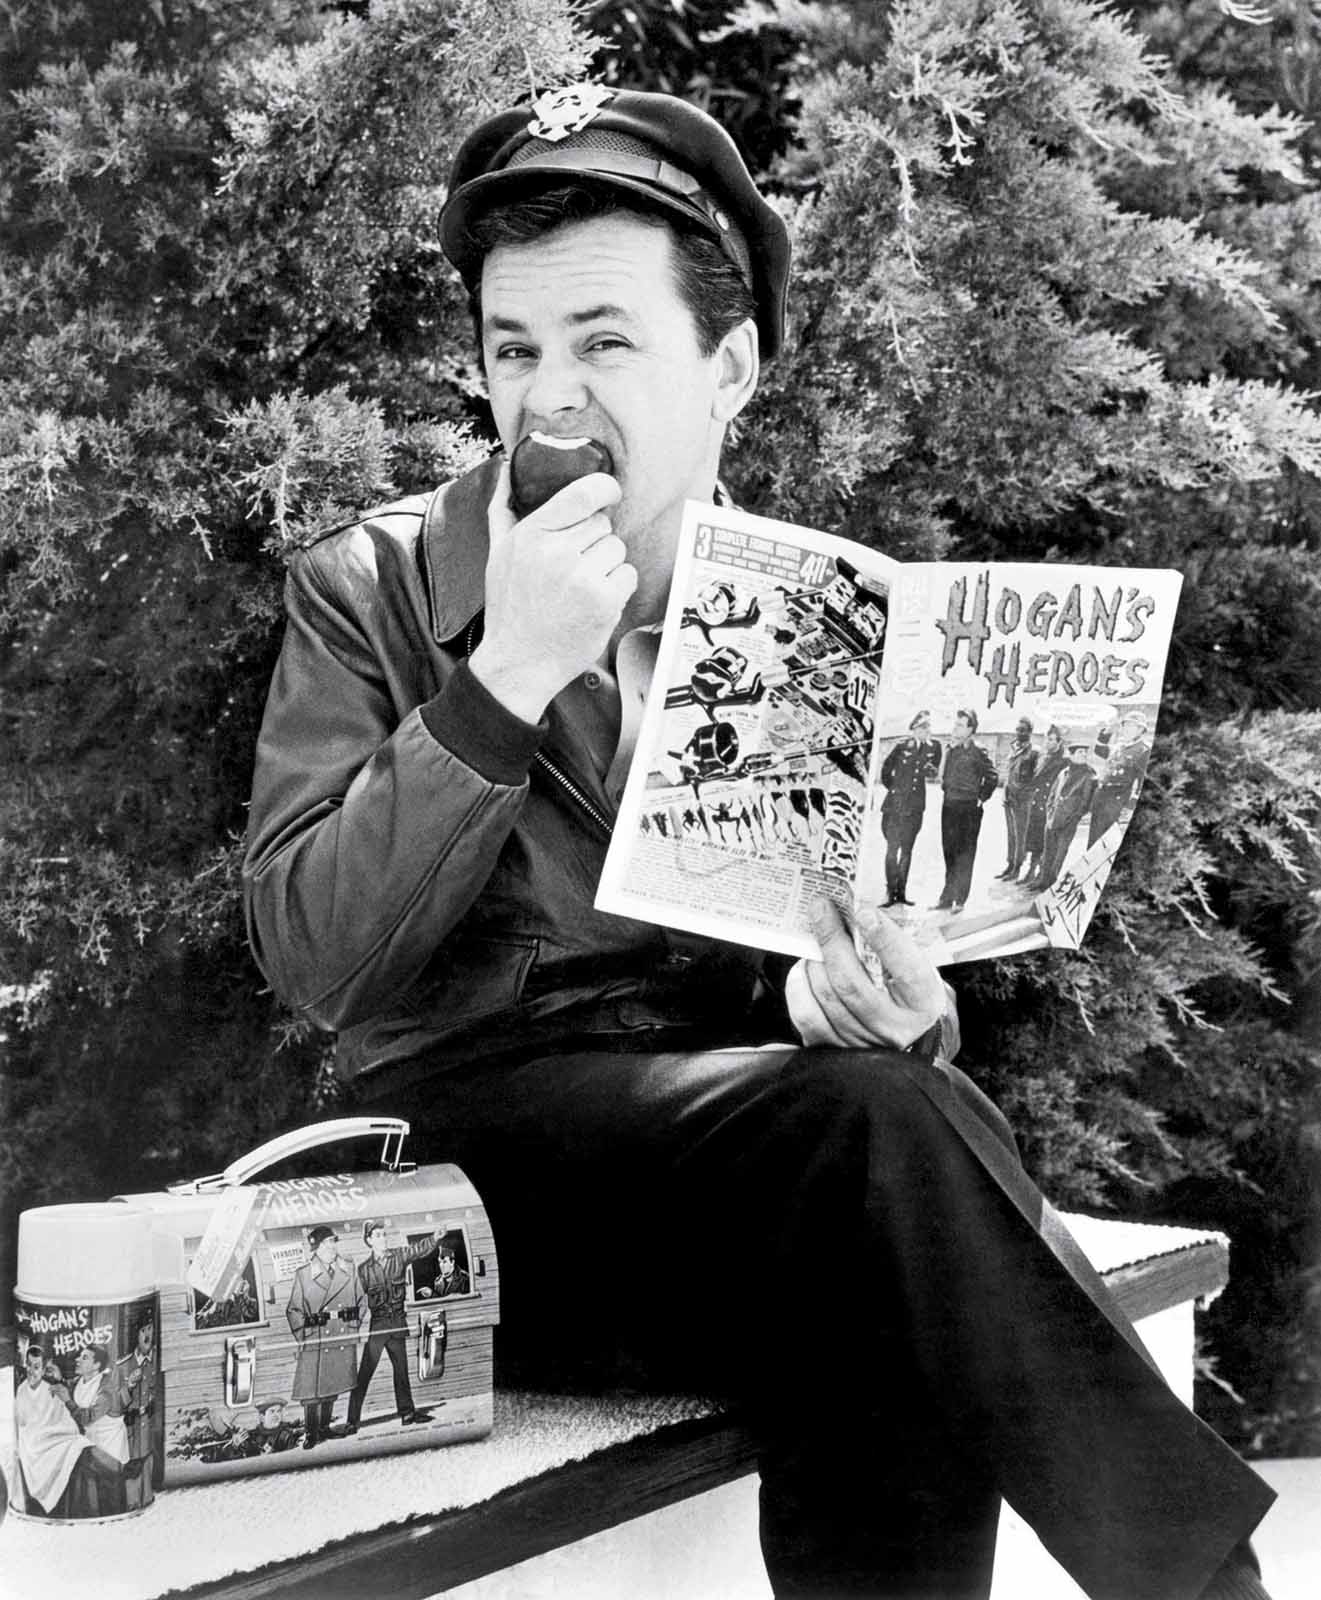 Bob Crane was a true American TV star with 'Hogan's Heroes'. But after his untimely demise, the truth about his private life came out in the open.